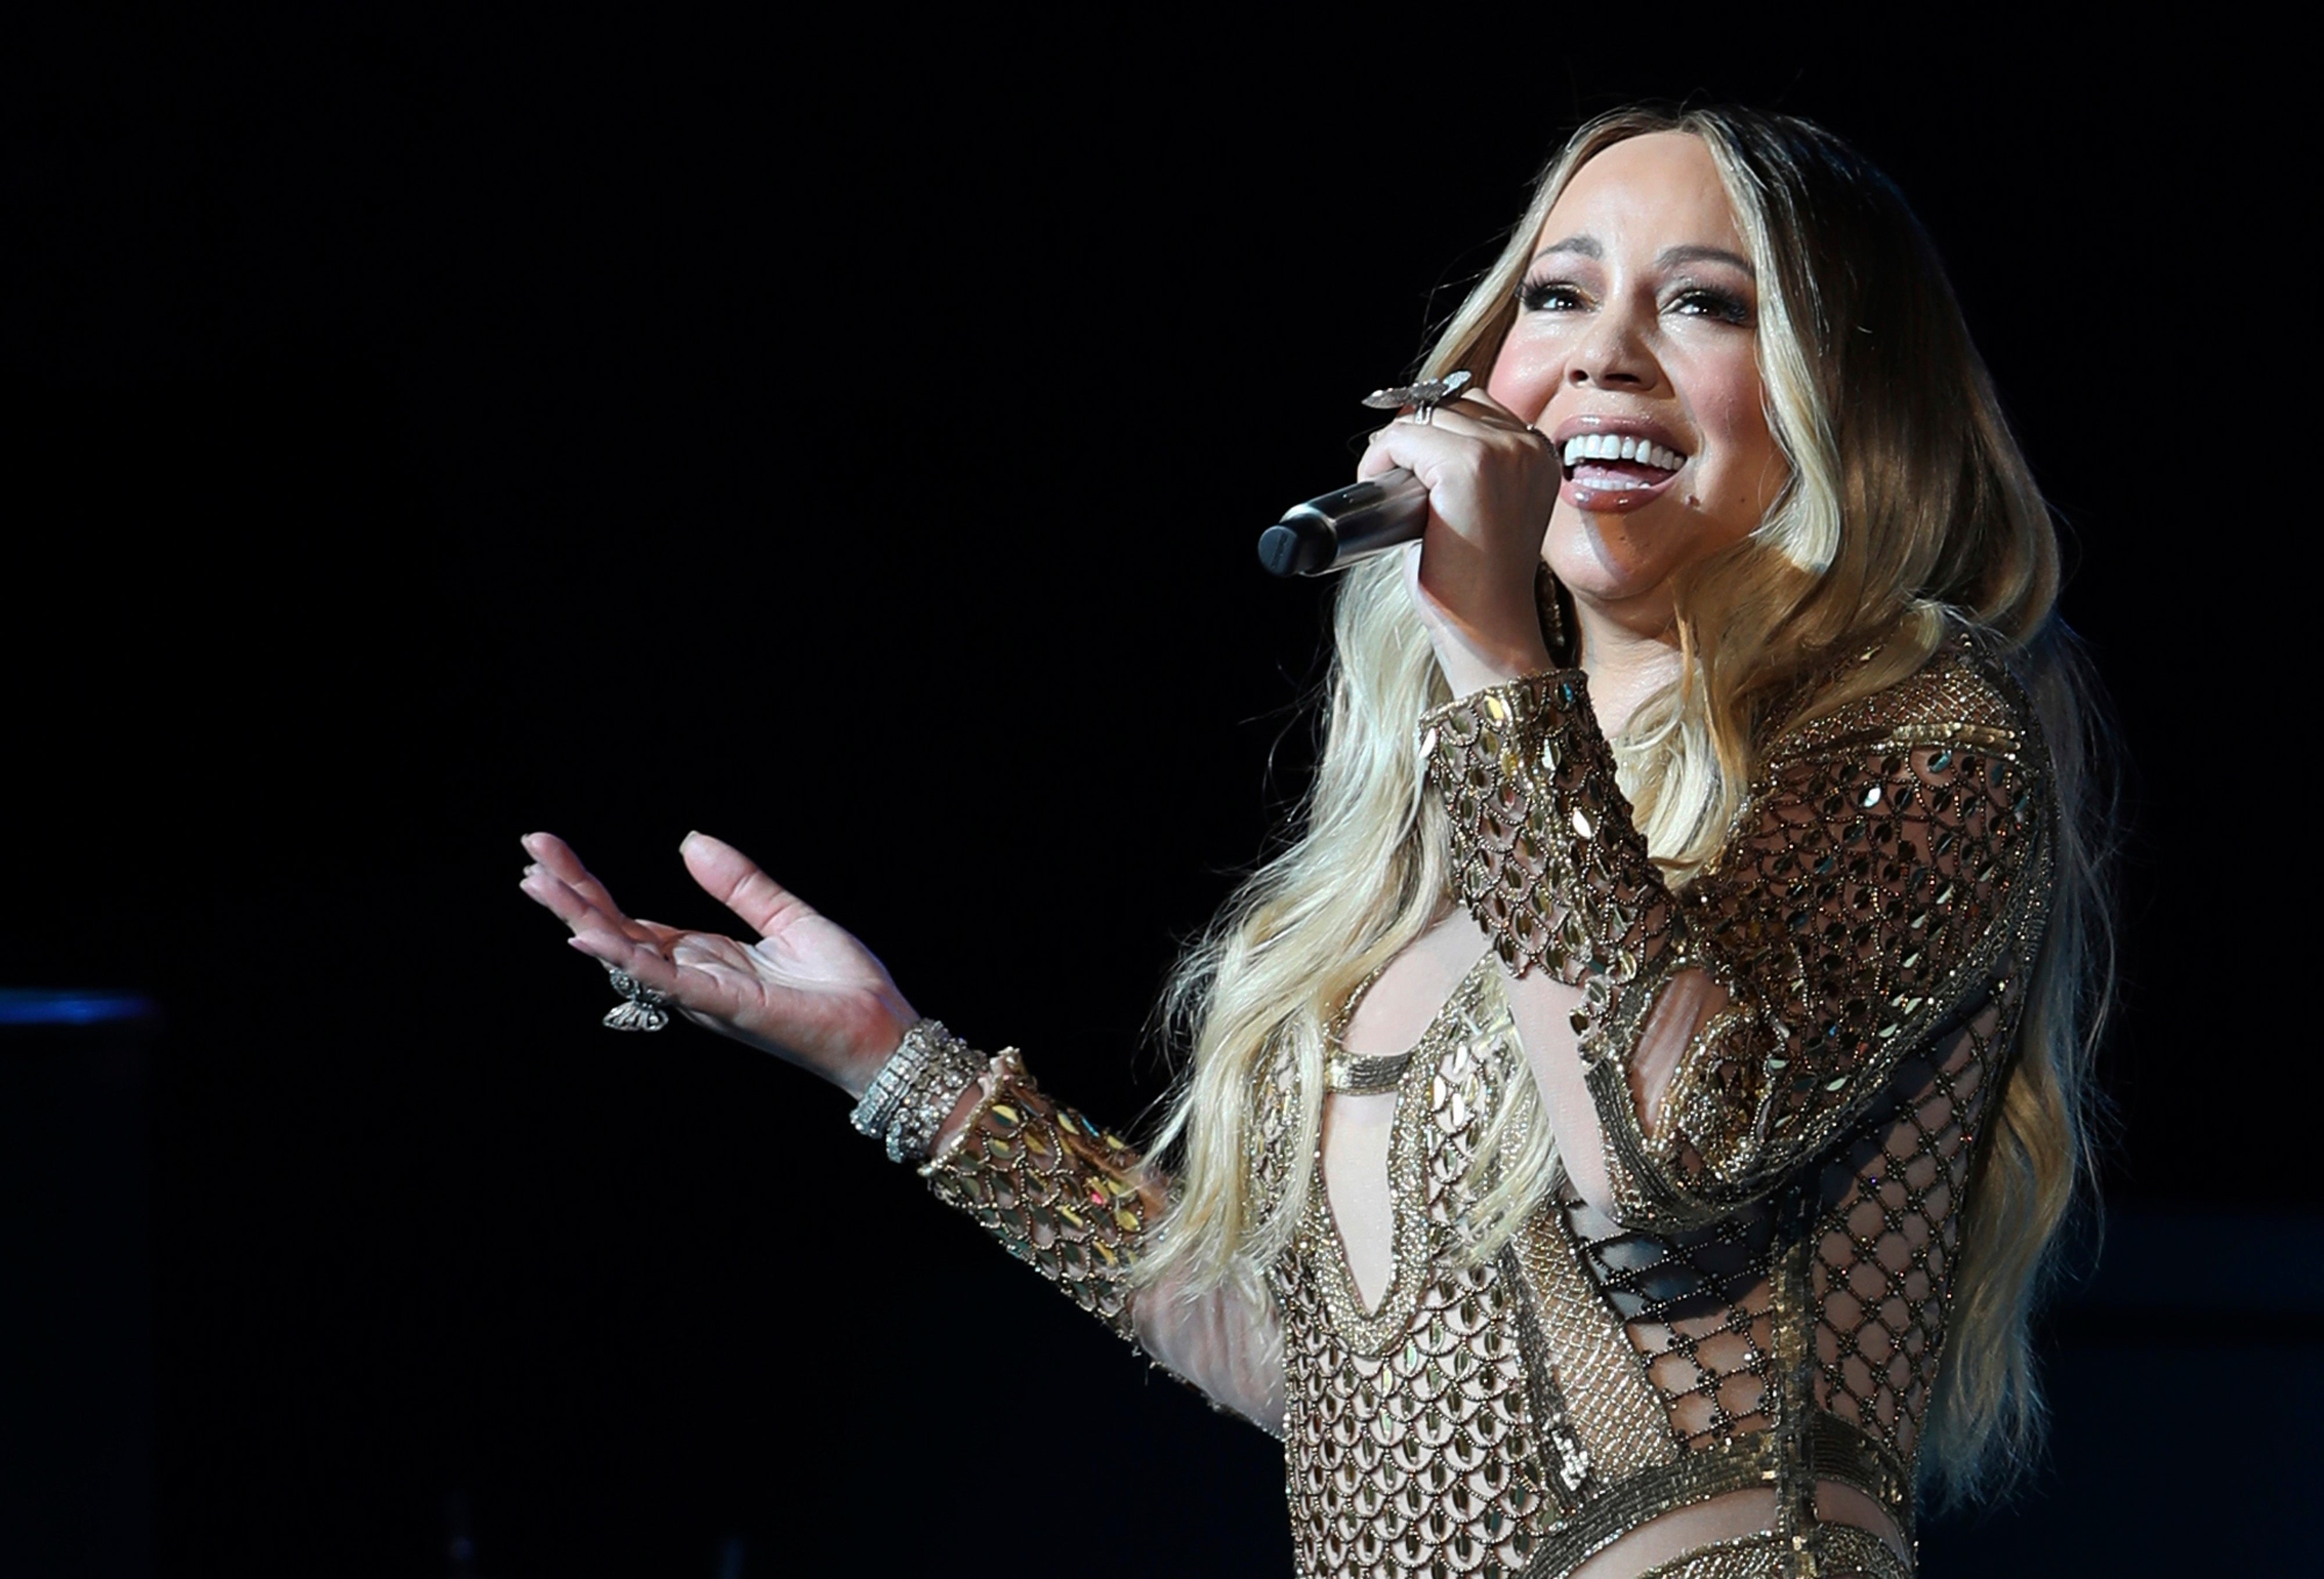 Mariah Carey is inviting fans into her penthouse